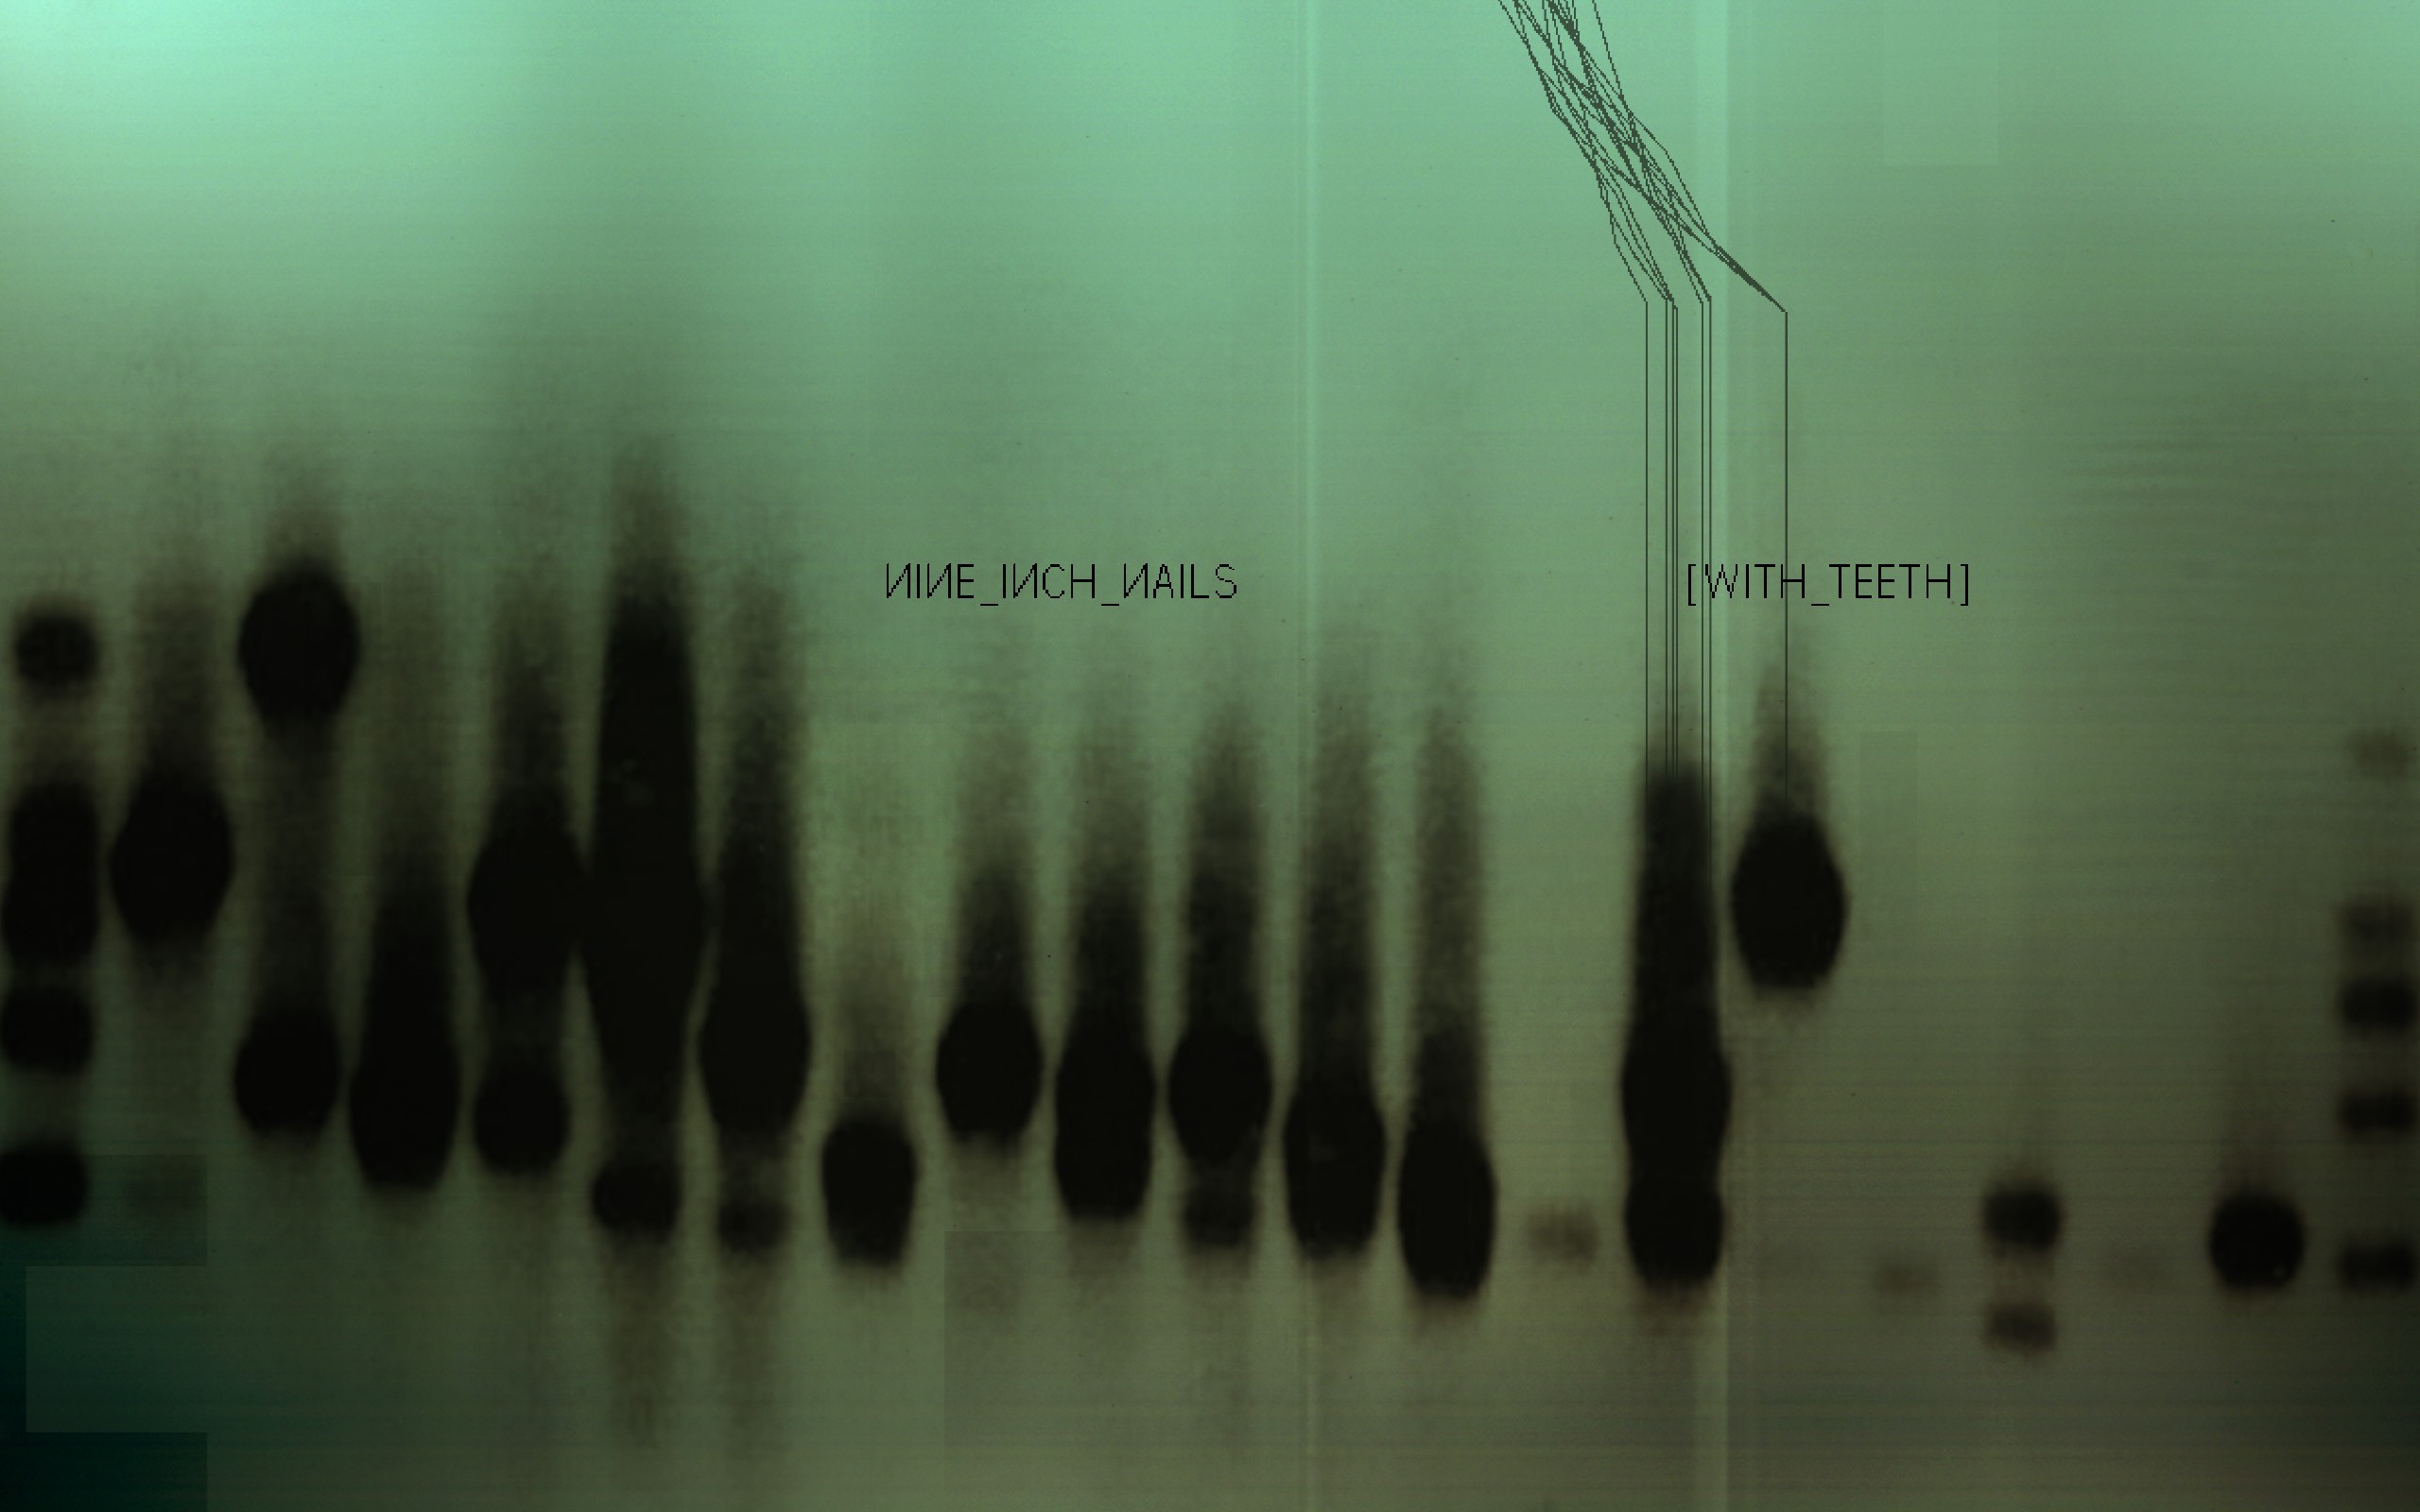 General 2560x1600 Nine Inch Nails music artwork text